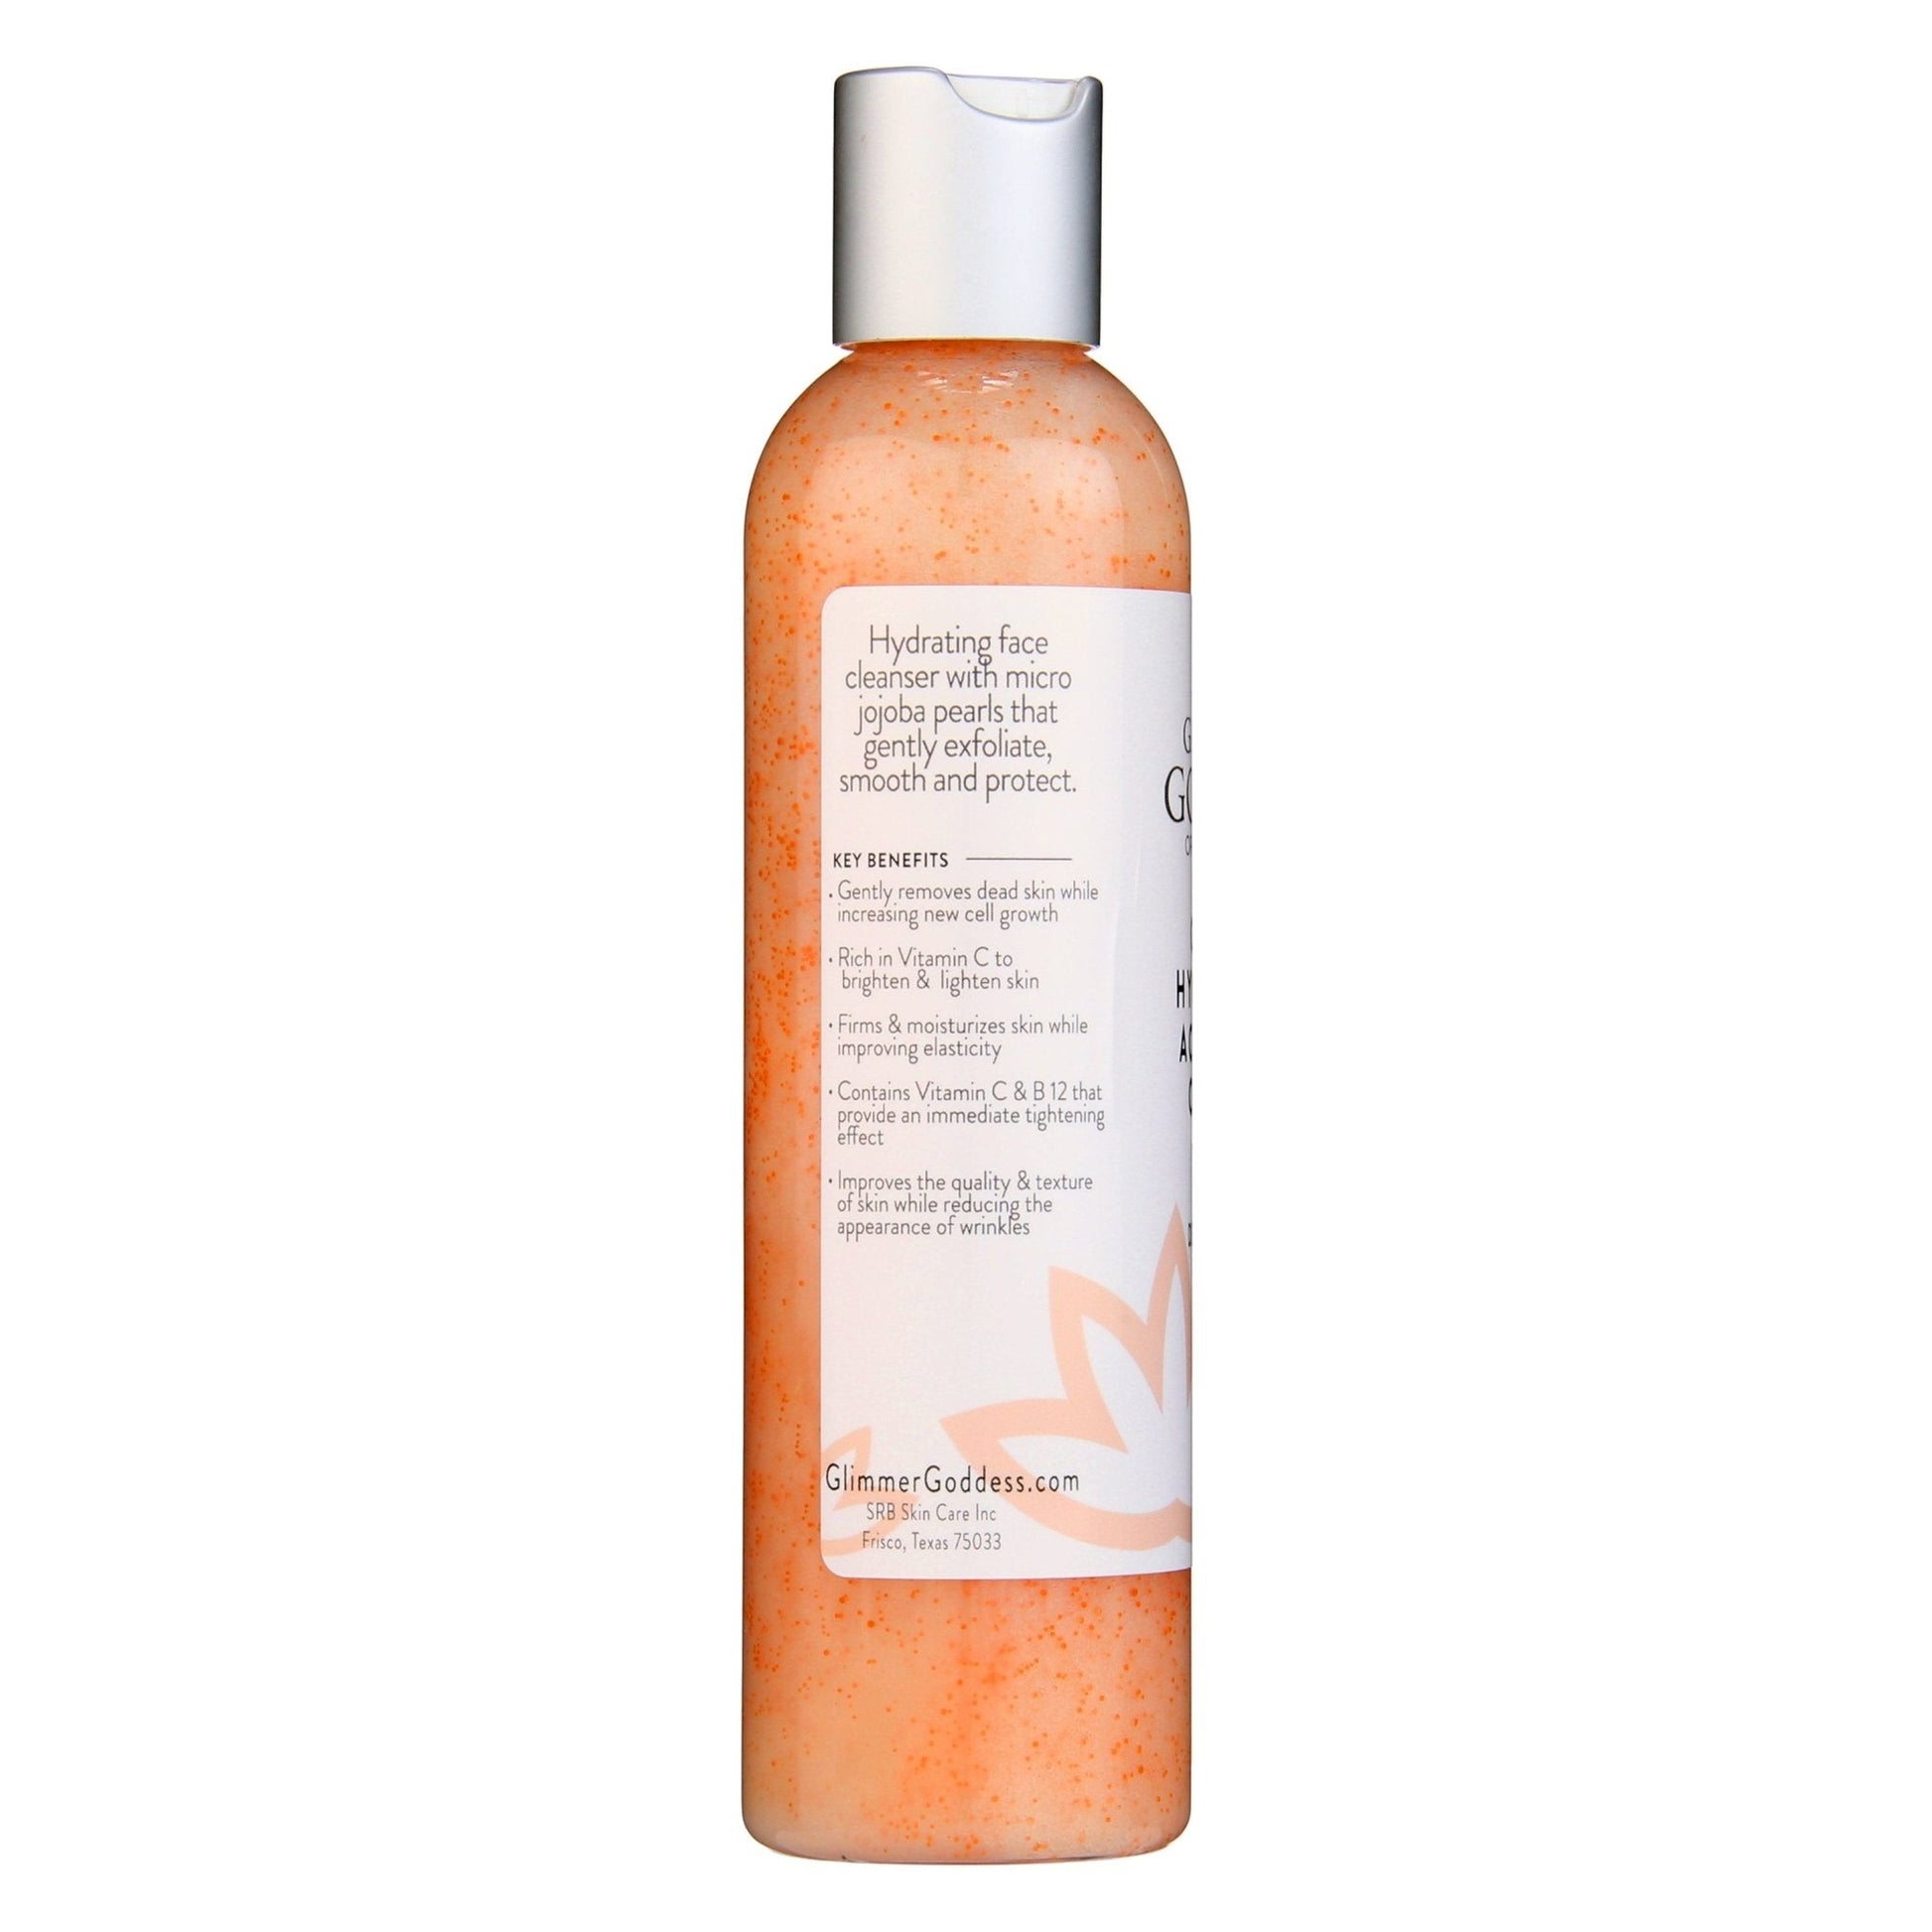 Organic Hyaluronic Acid Facial Cleanser-1